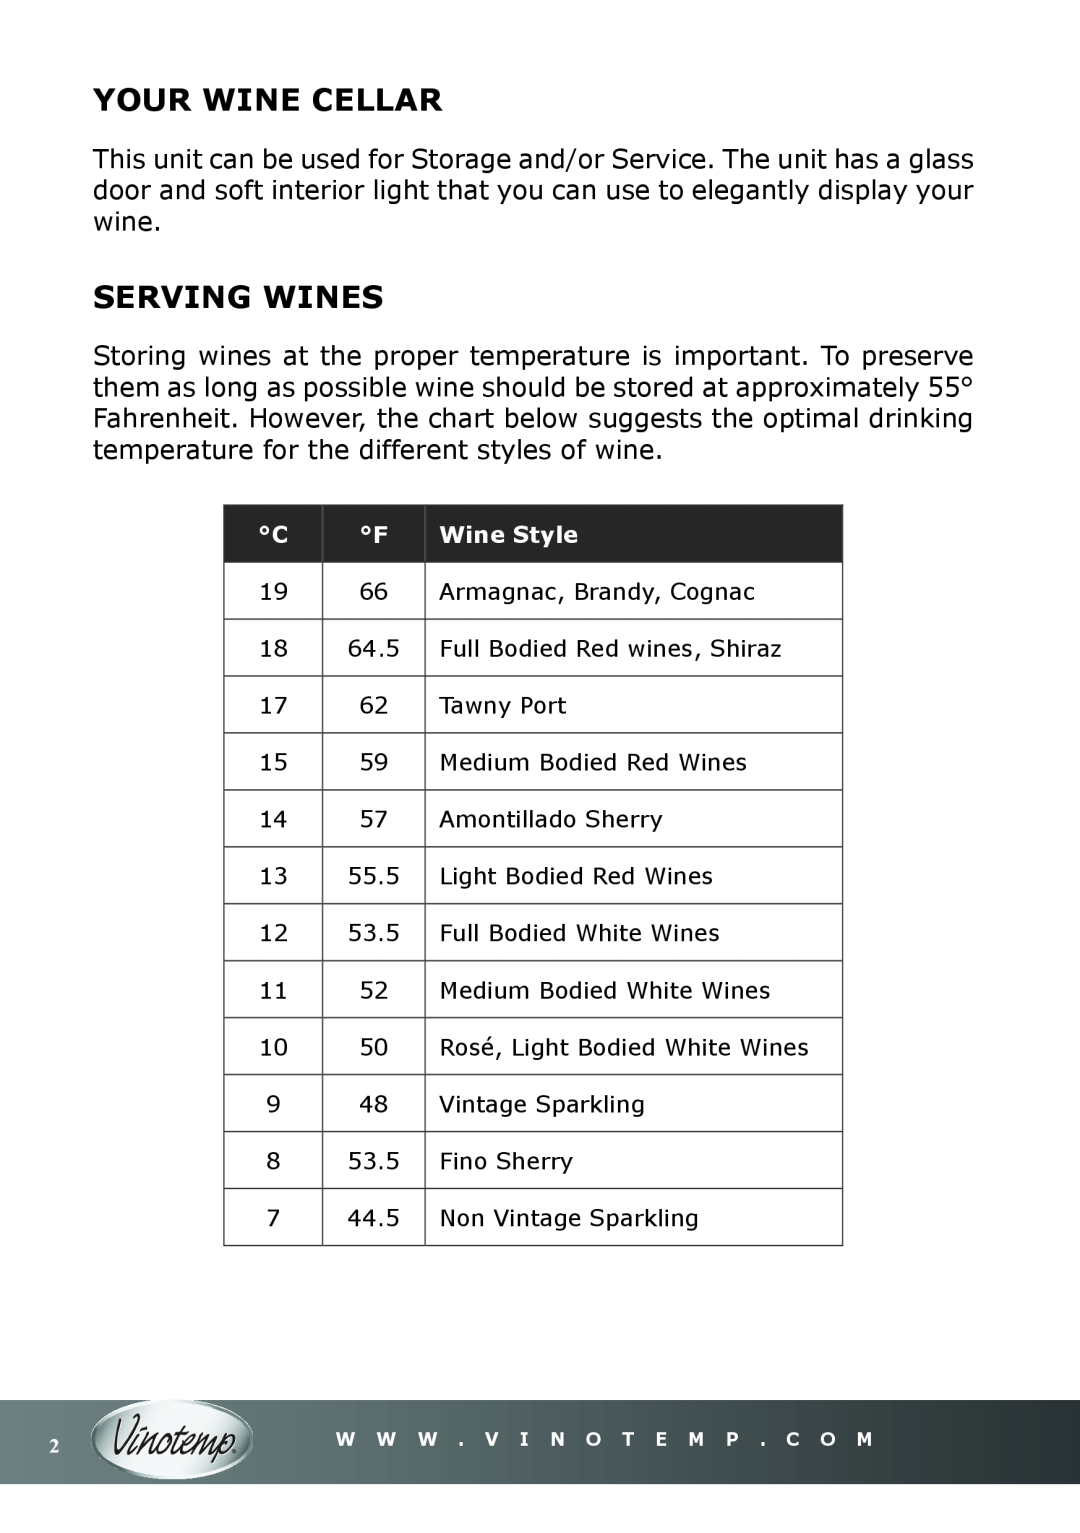 Vinotemp VT-18TEDS owner manual Your Wine Cellar, Serving Wines, Wine Style 